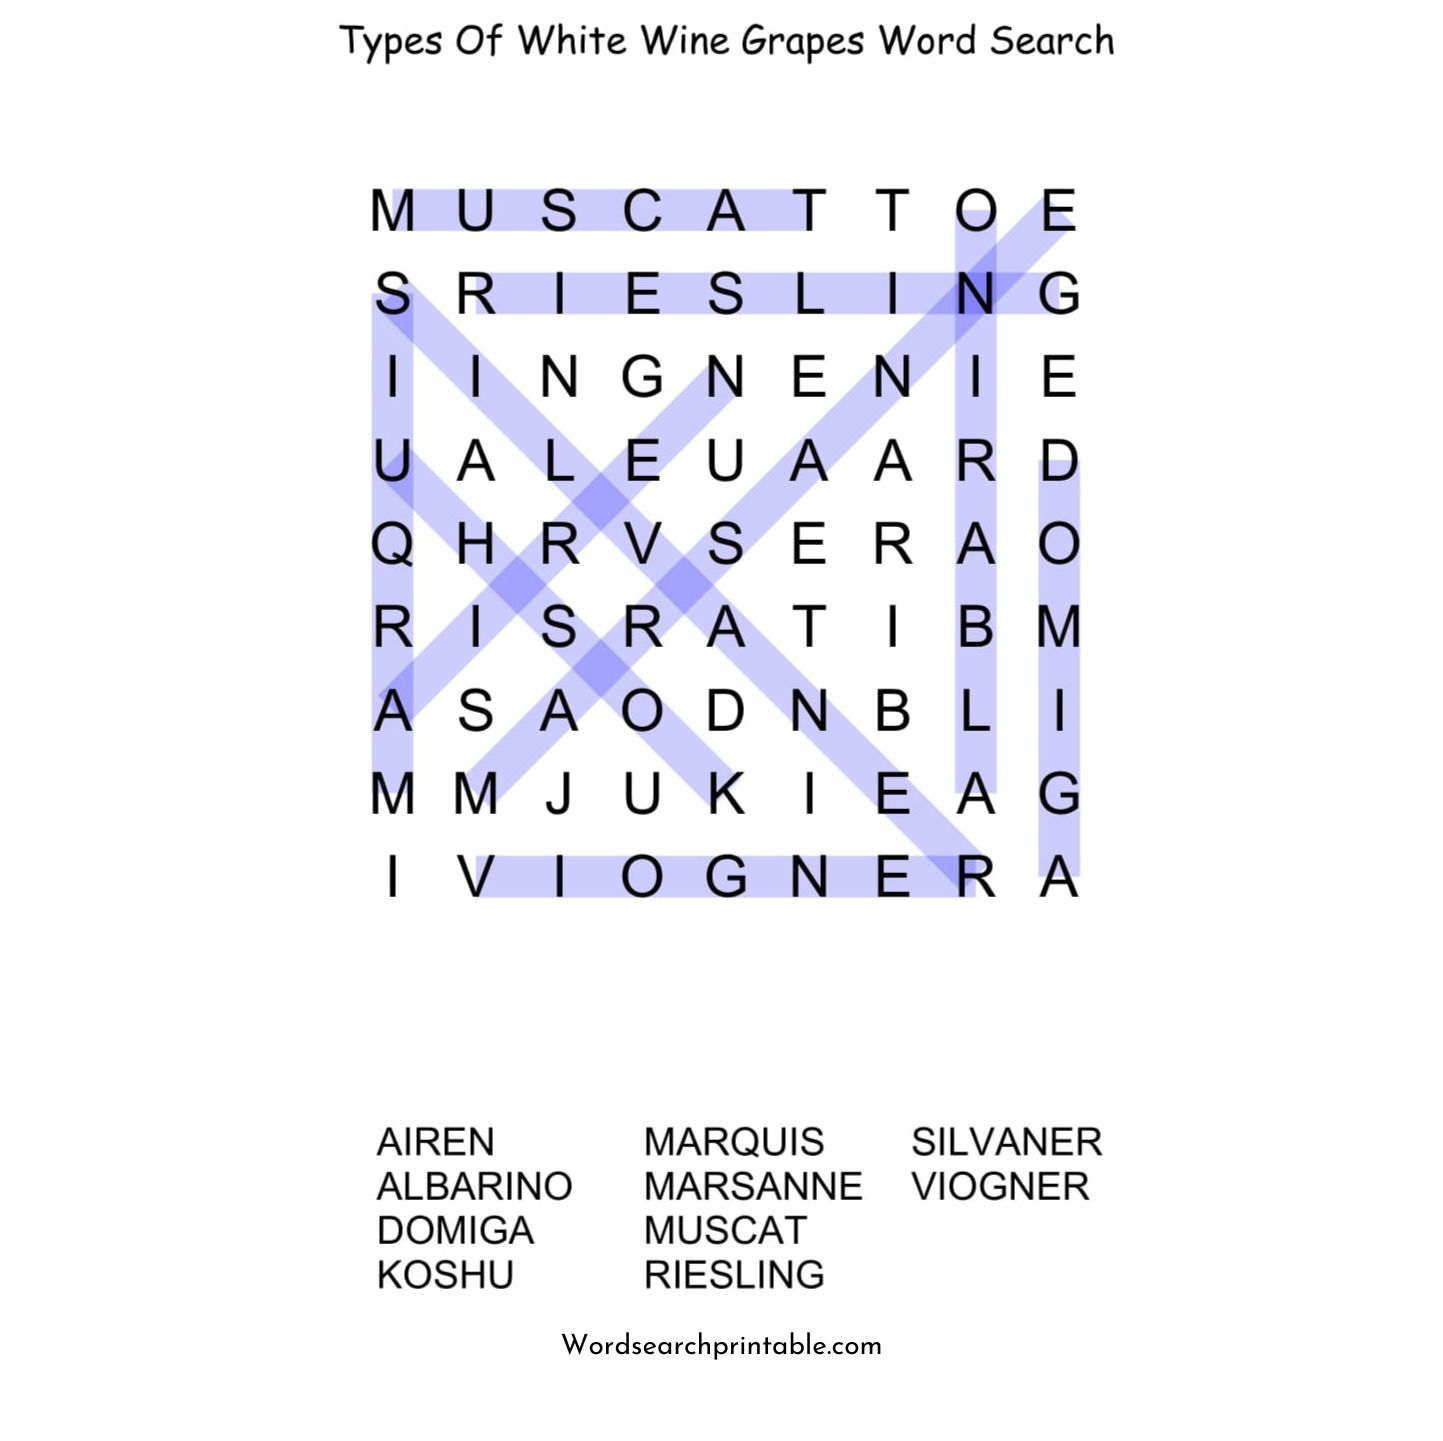 types of white wine grapes word search puzzle solution